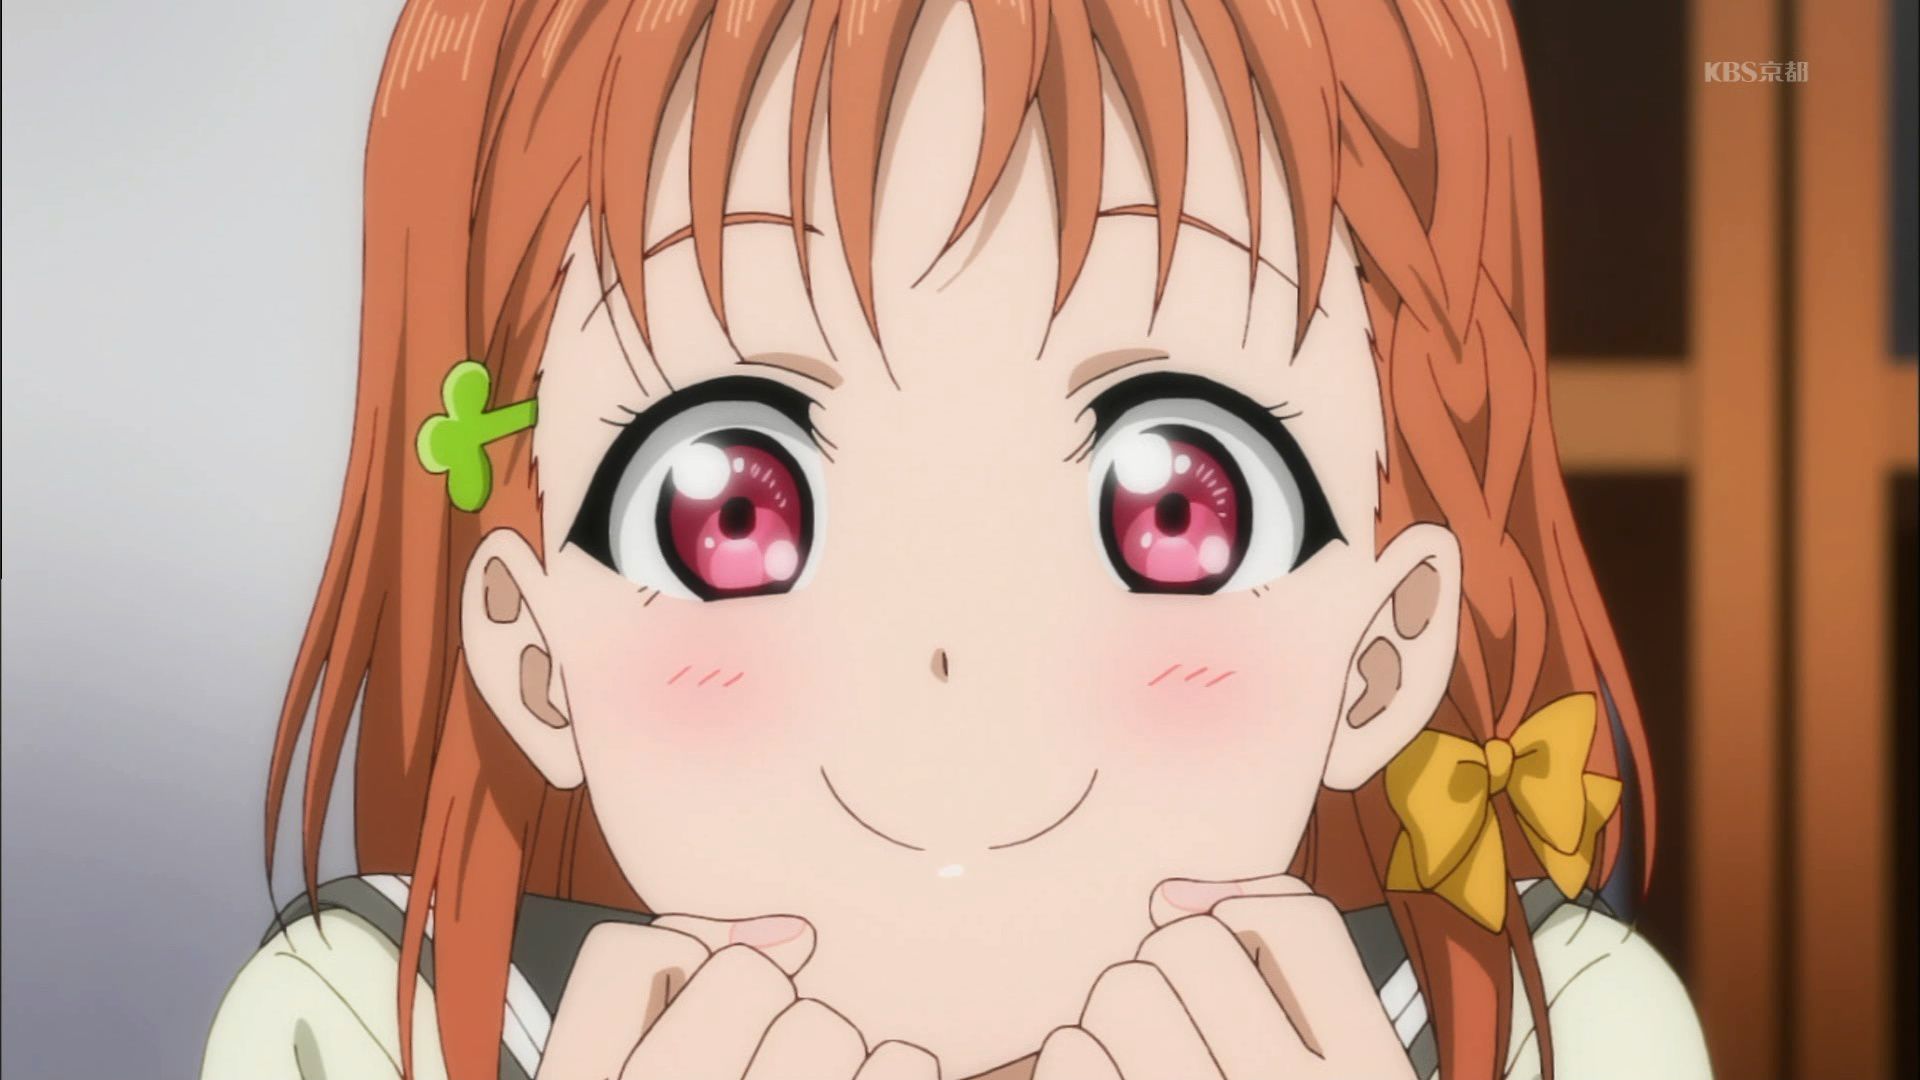 [Image] "love live! Sunshine "1000 songs she bend was its cute scene image competitions wwwwwwwwww 37